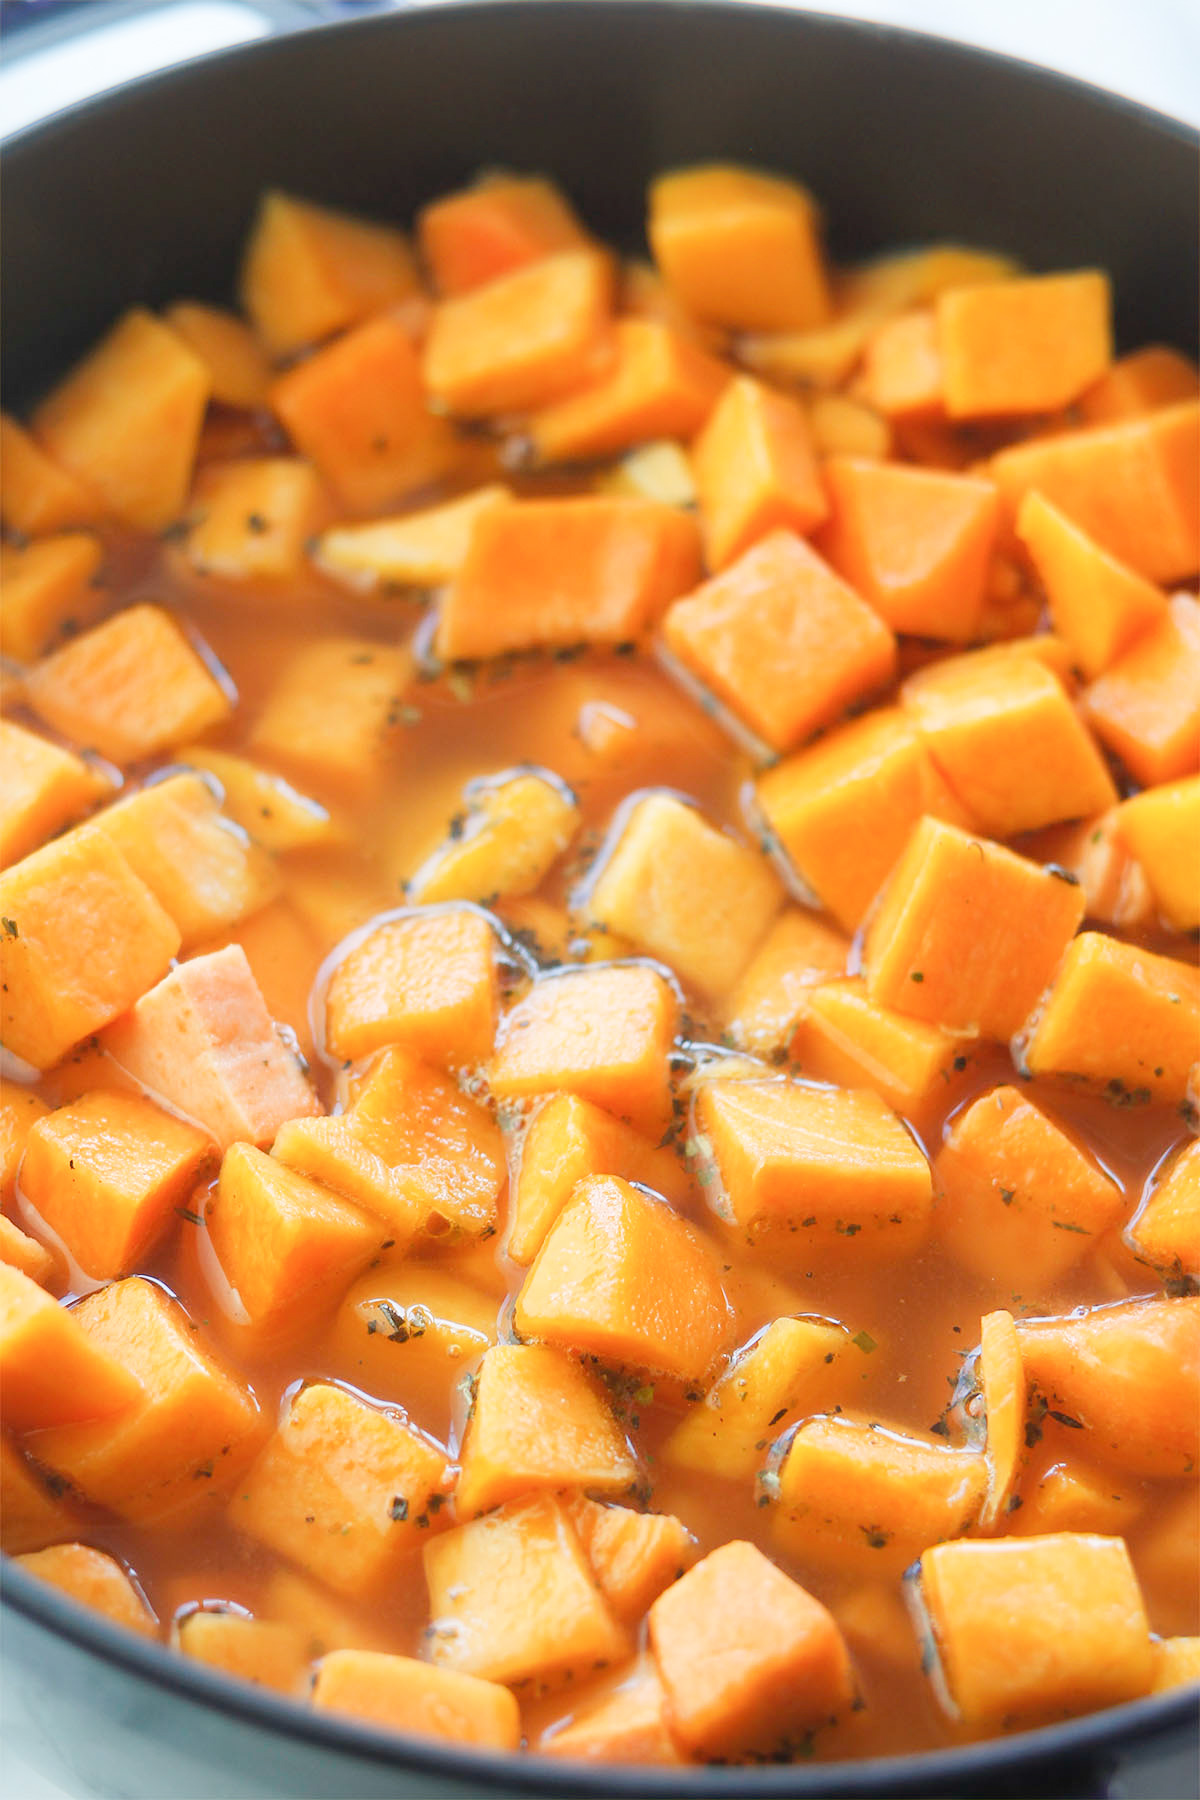 Pot filled with butternut squash, sweet potatoes, carrots and chicken stock.